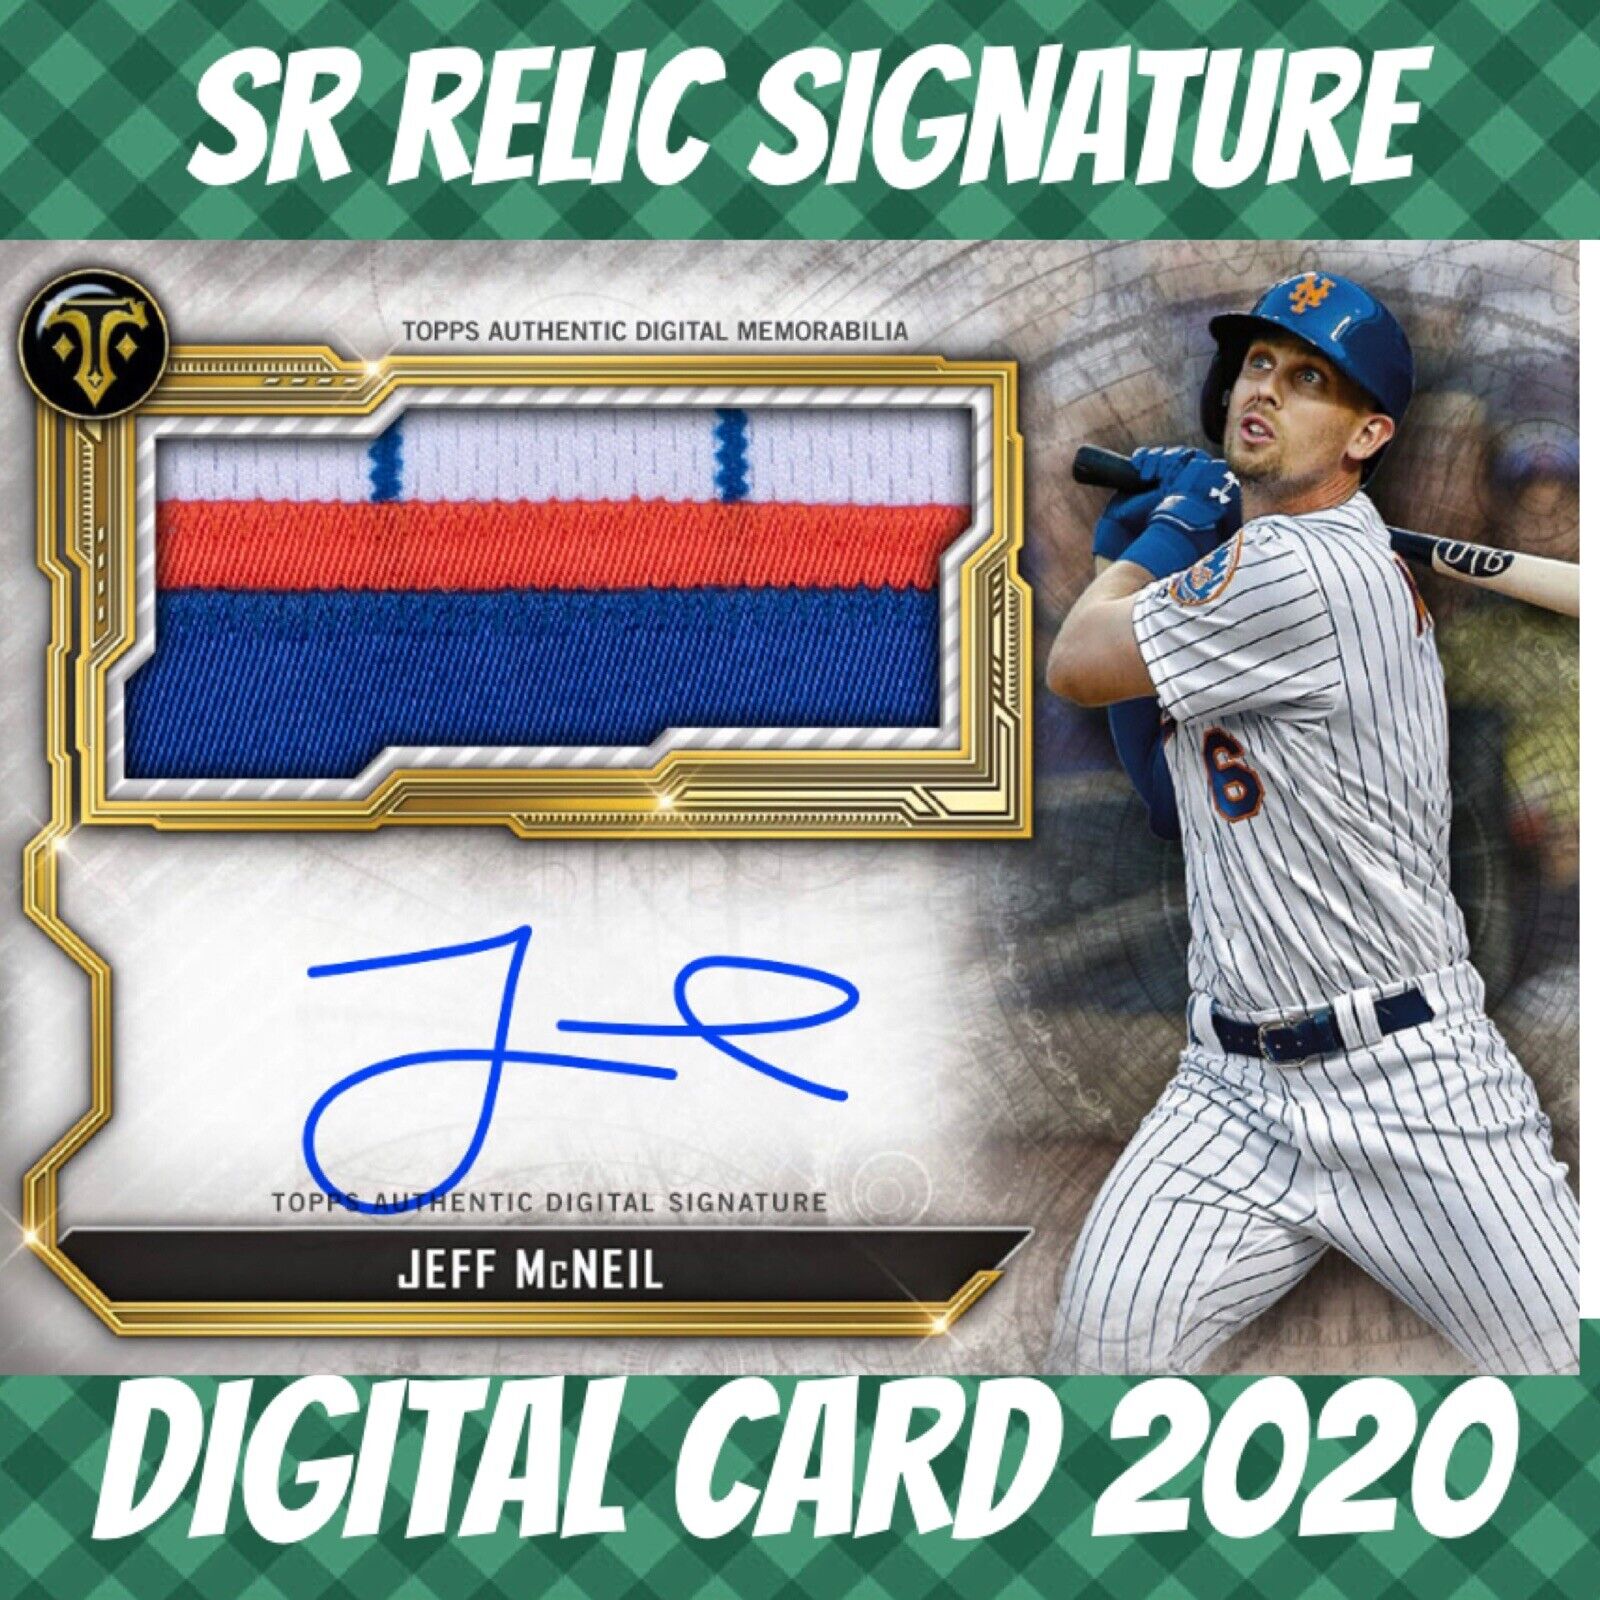 2020 Topps Colorful Digital Jeff Mcneil Triple Threads Relic Signature Digital